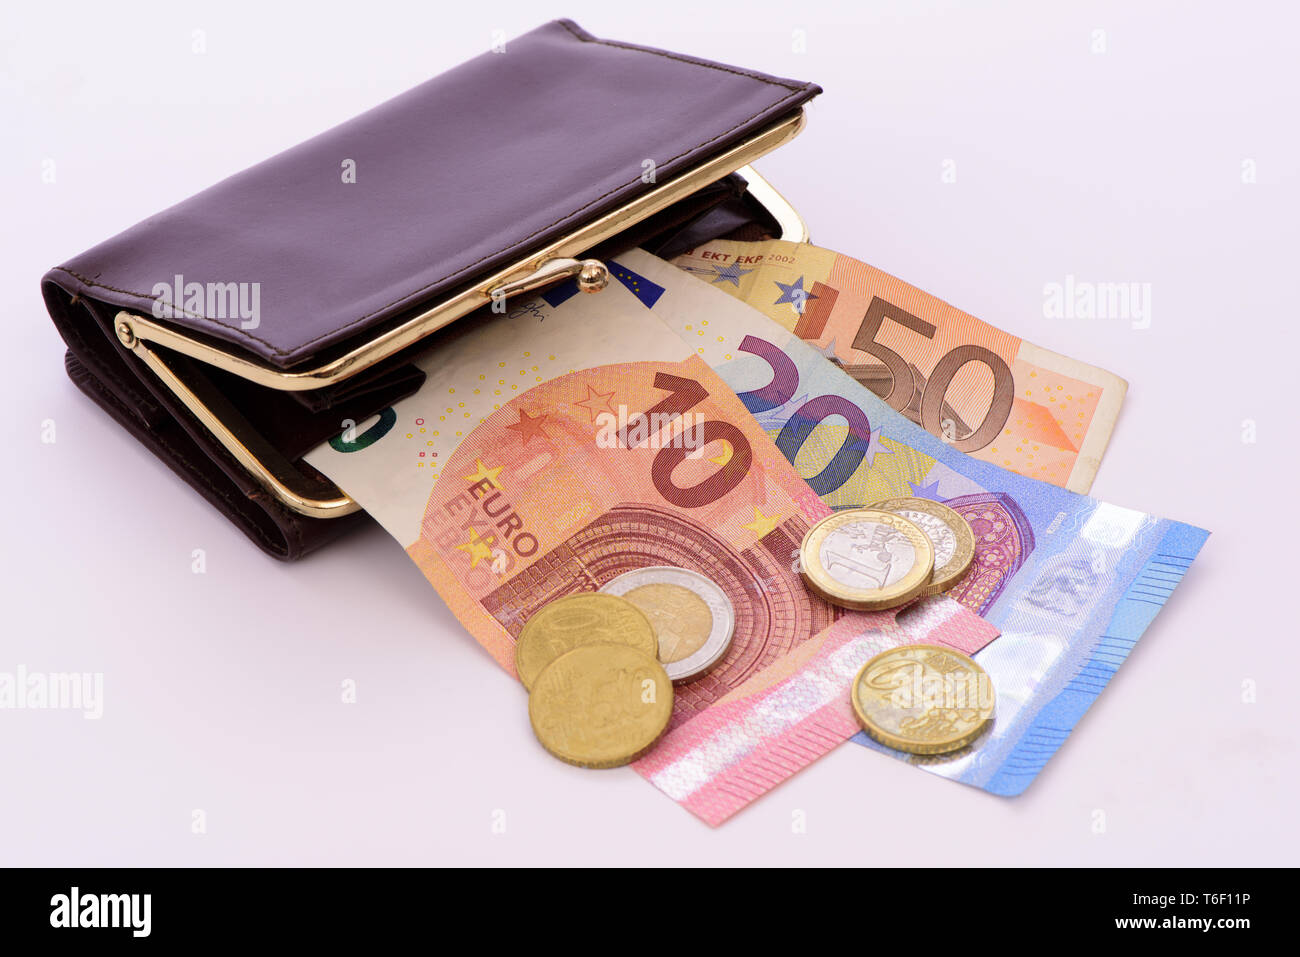 Purse with coins and banknotes of European currency Stock Photo